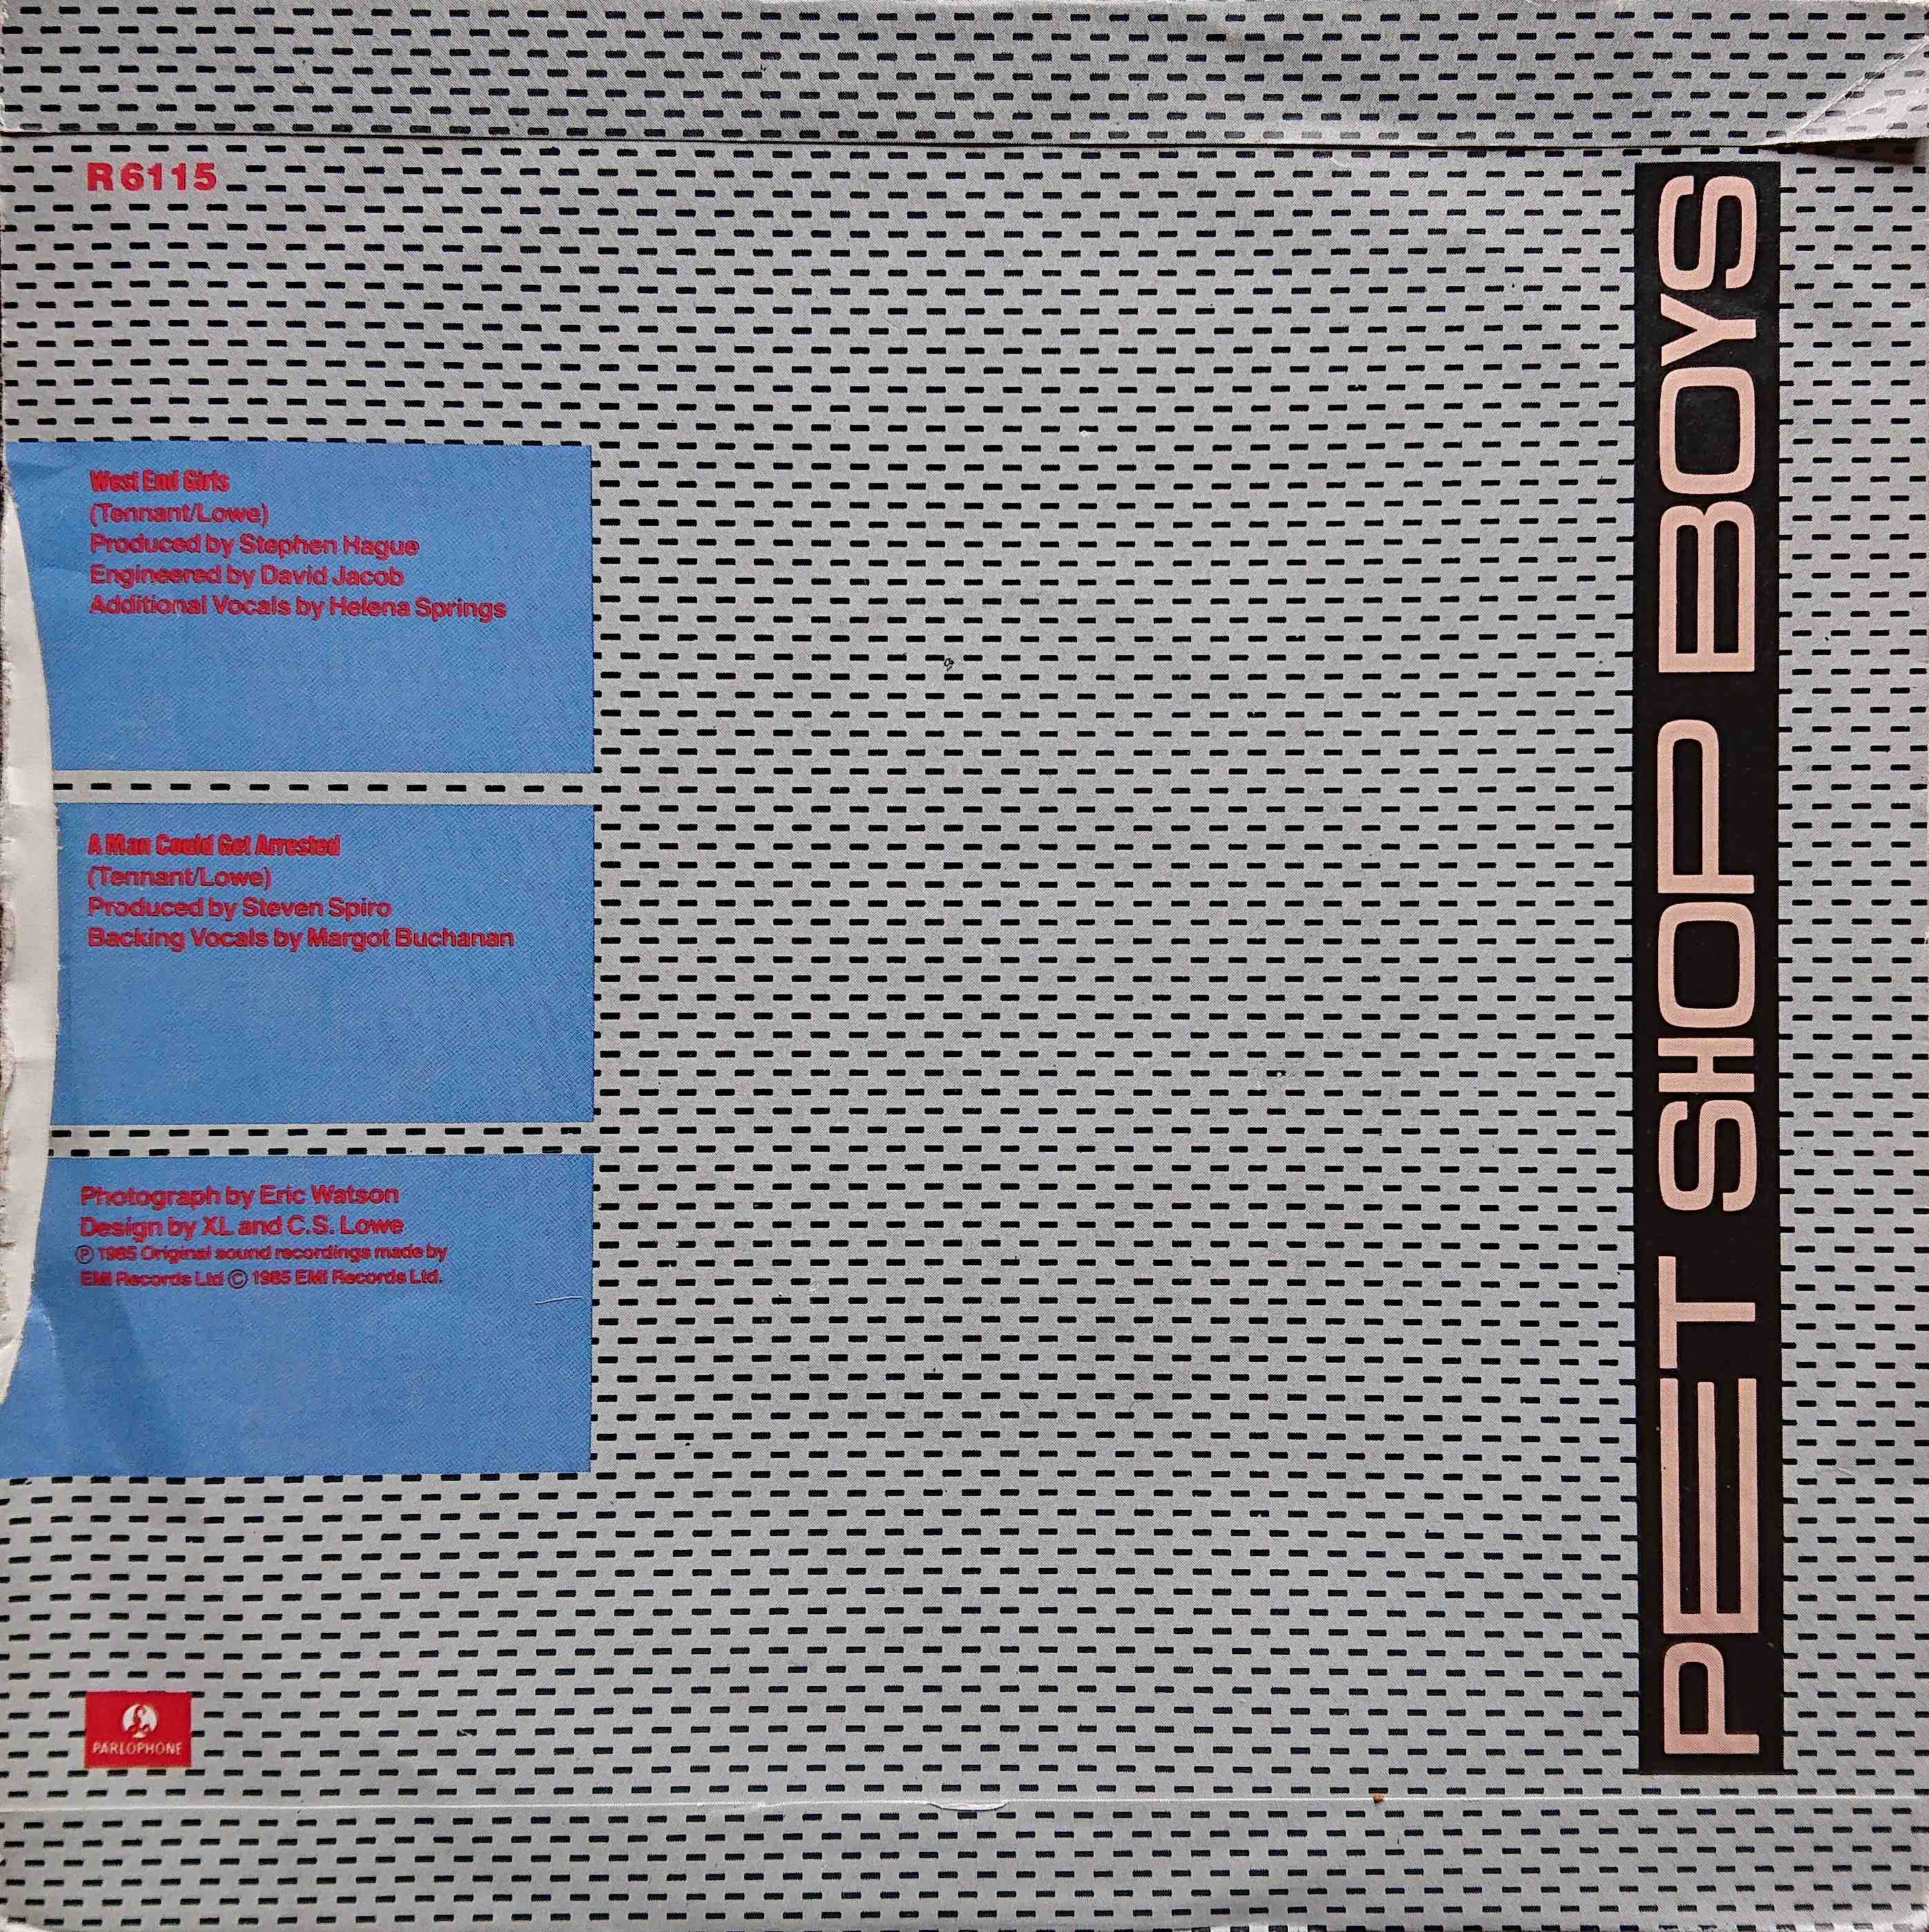 Back cover of R 6115